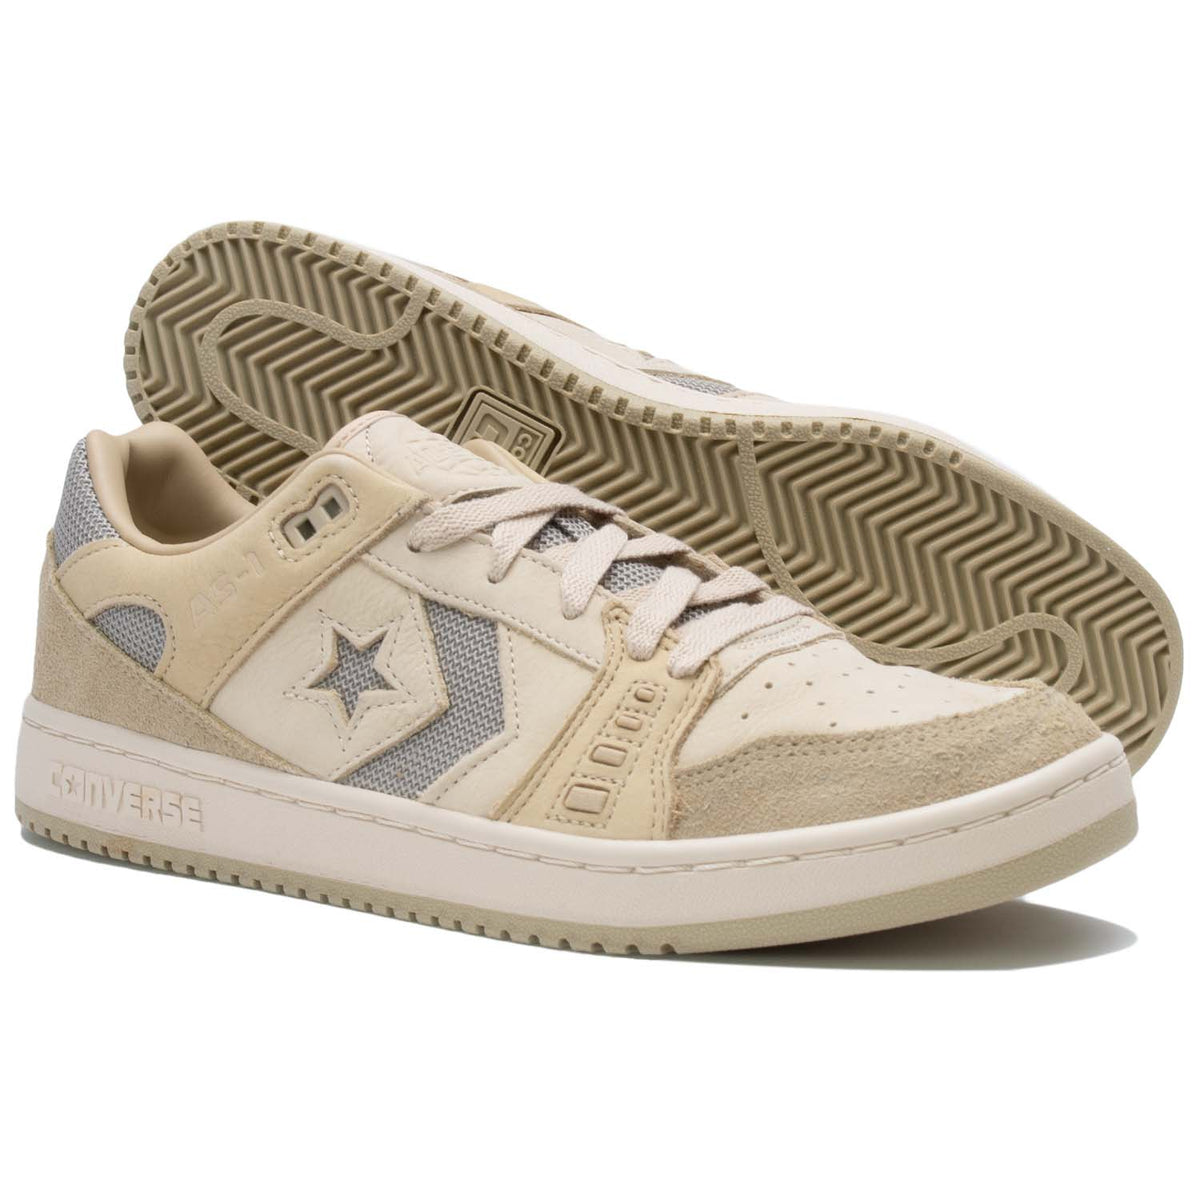 Converse - AS-1 Pro OX - Shifting Sand/Warm Sand